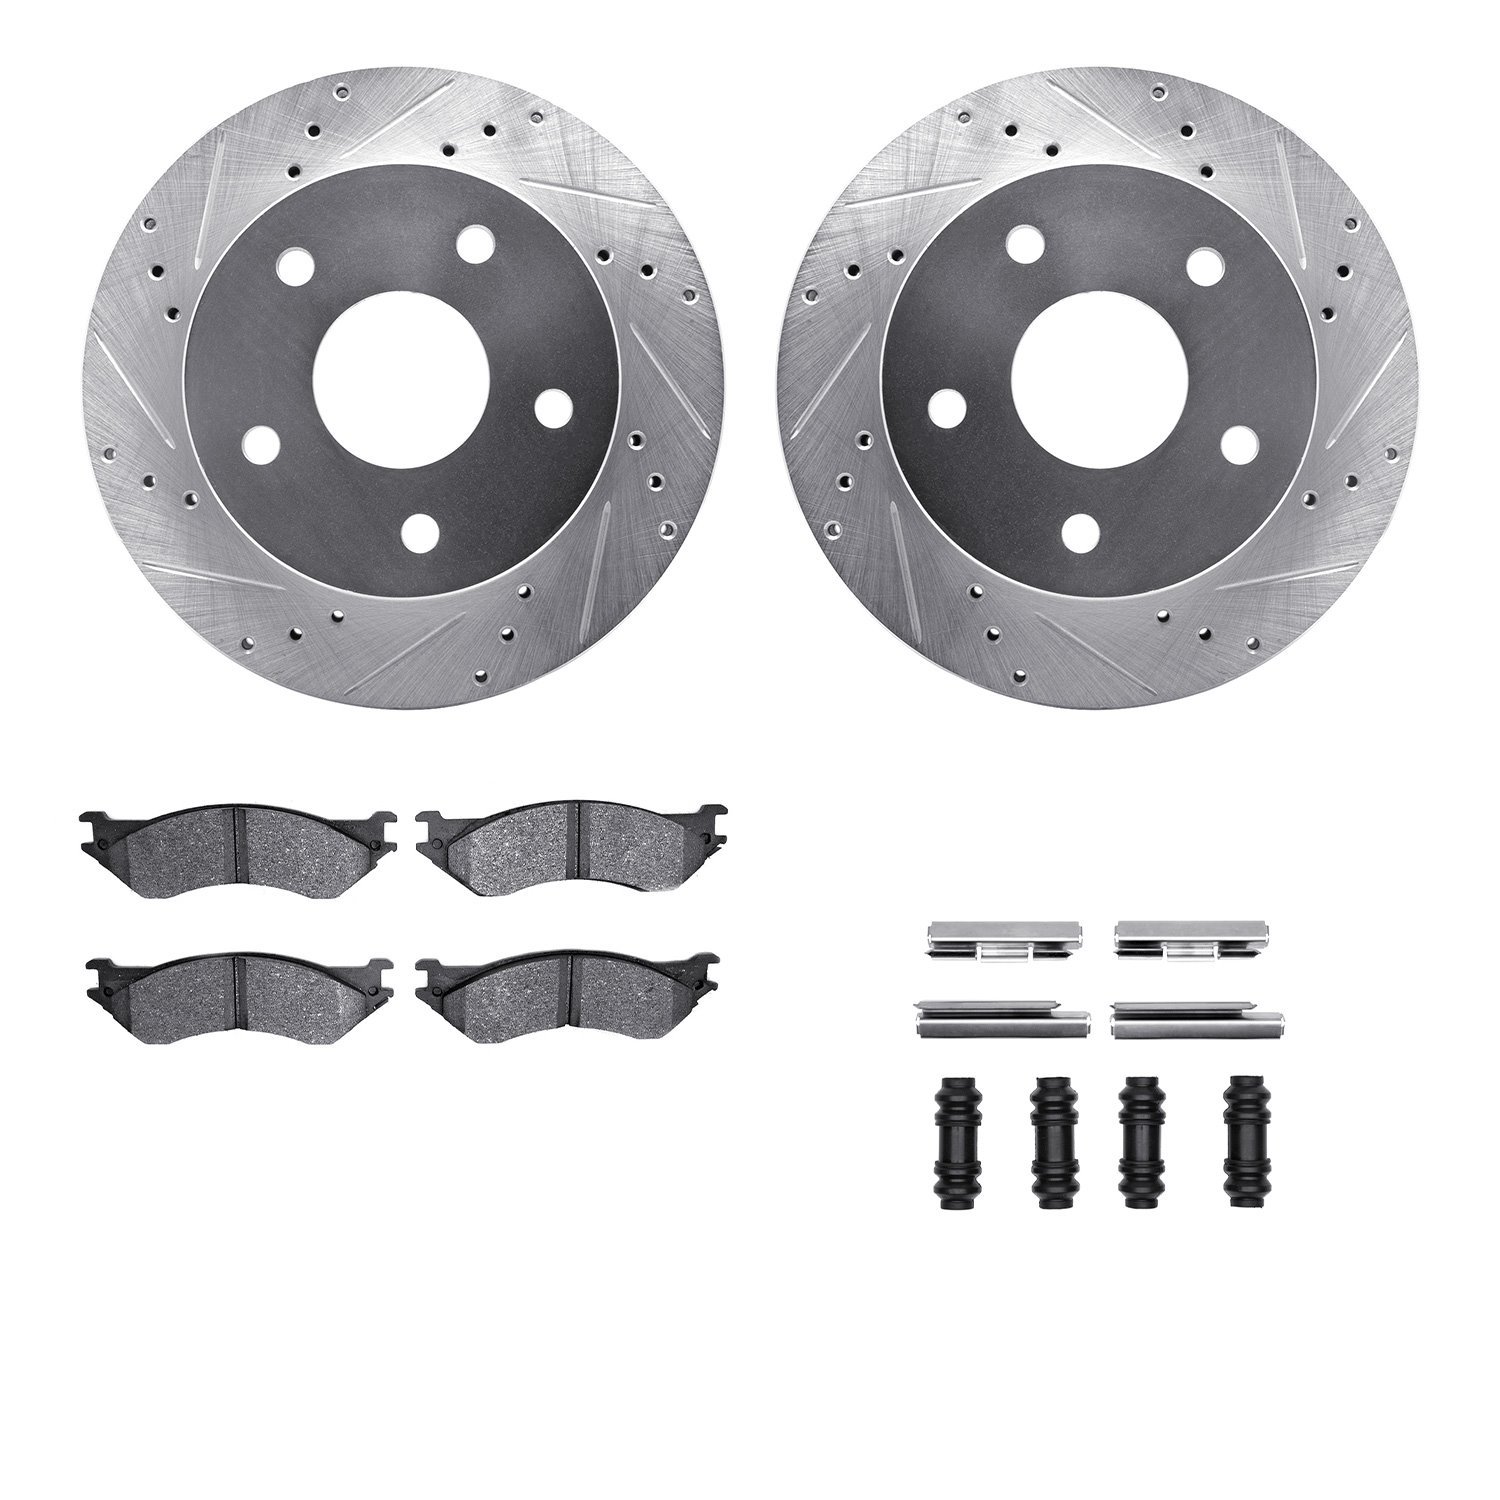 7412-40008 Drilled/Slotted Brake Rotors with Ultimate-Duty Brake Pads Kit & Hardware [Silver], 2000-2001 Mopar, Position: Front